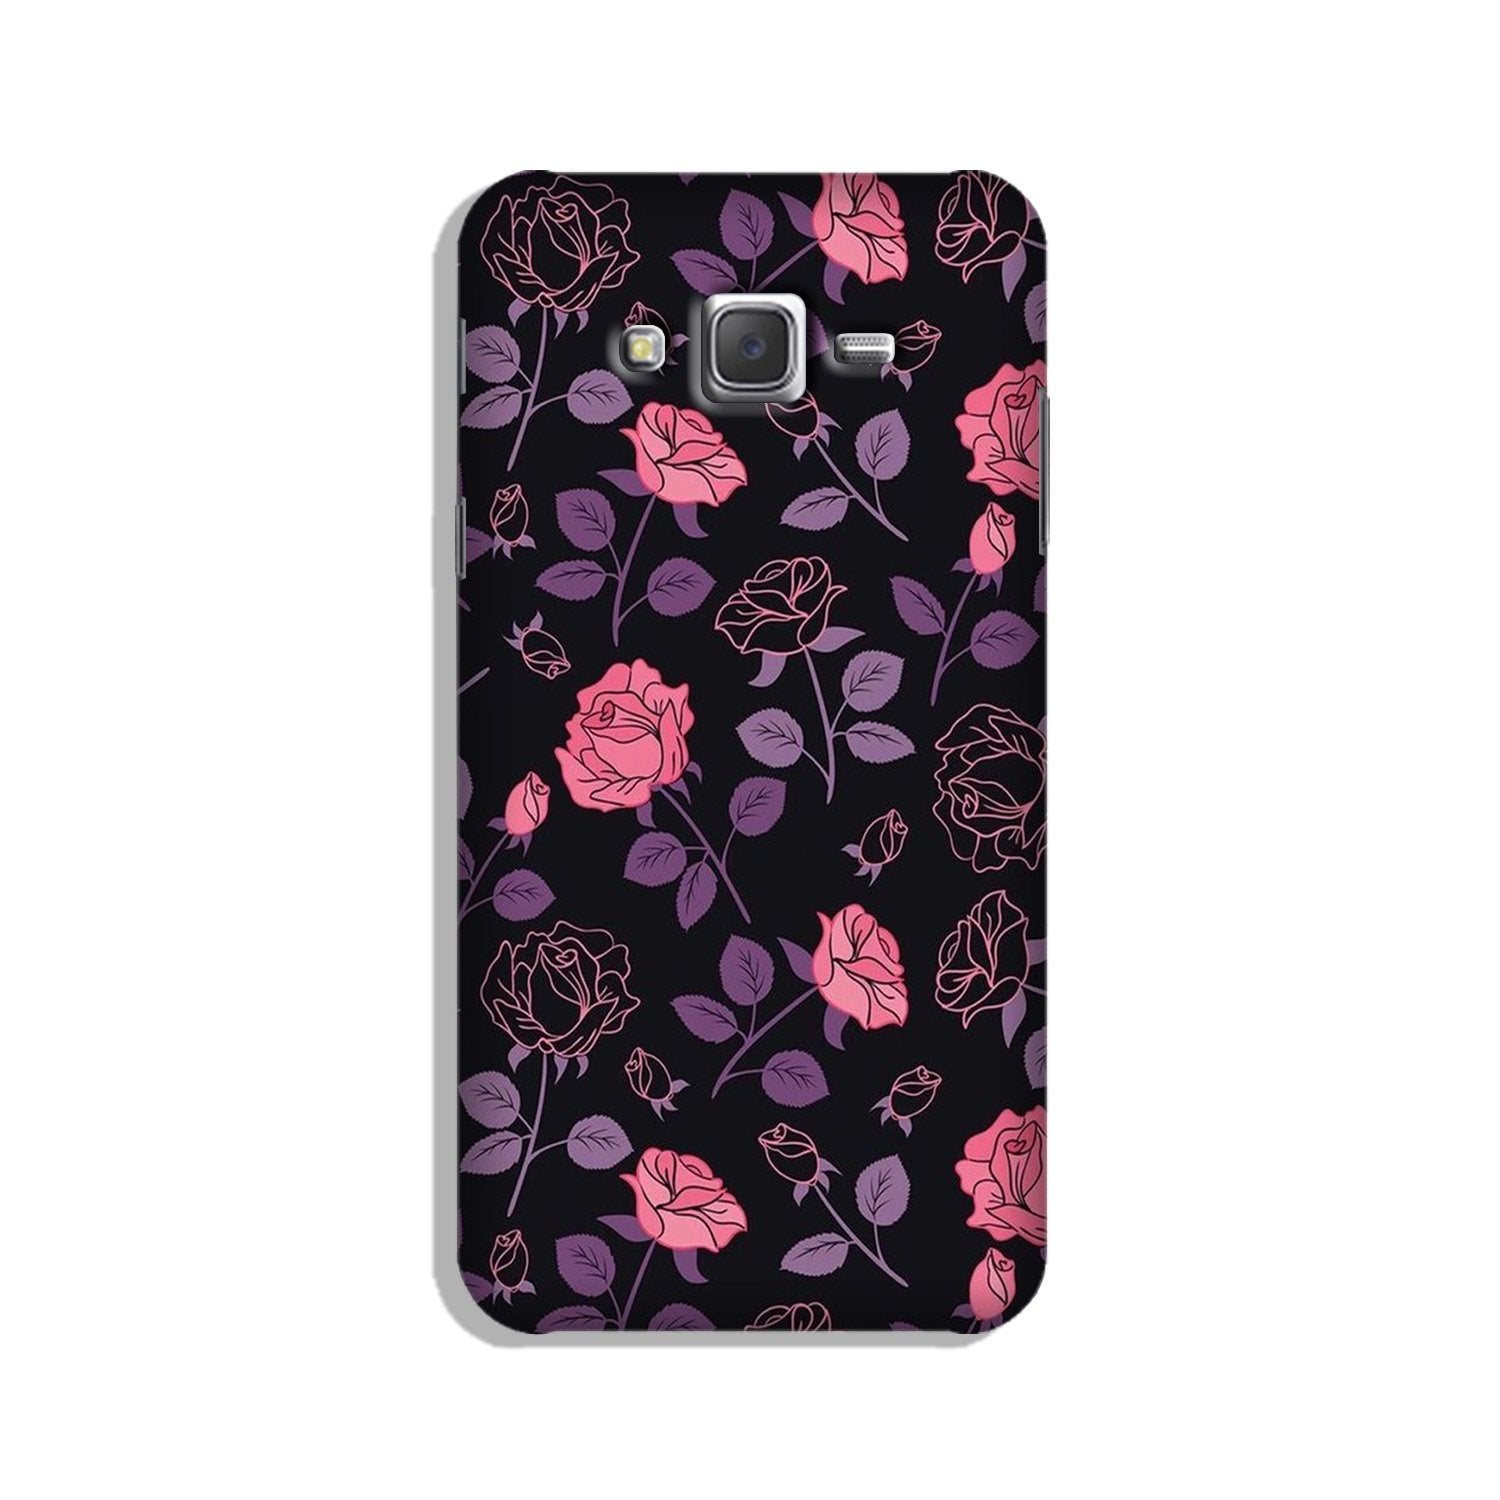 Rose Black Background Case for Galaxy J5 (2015)